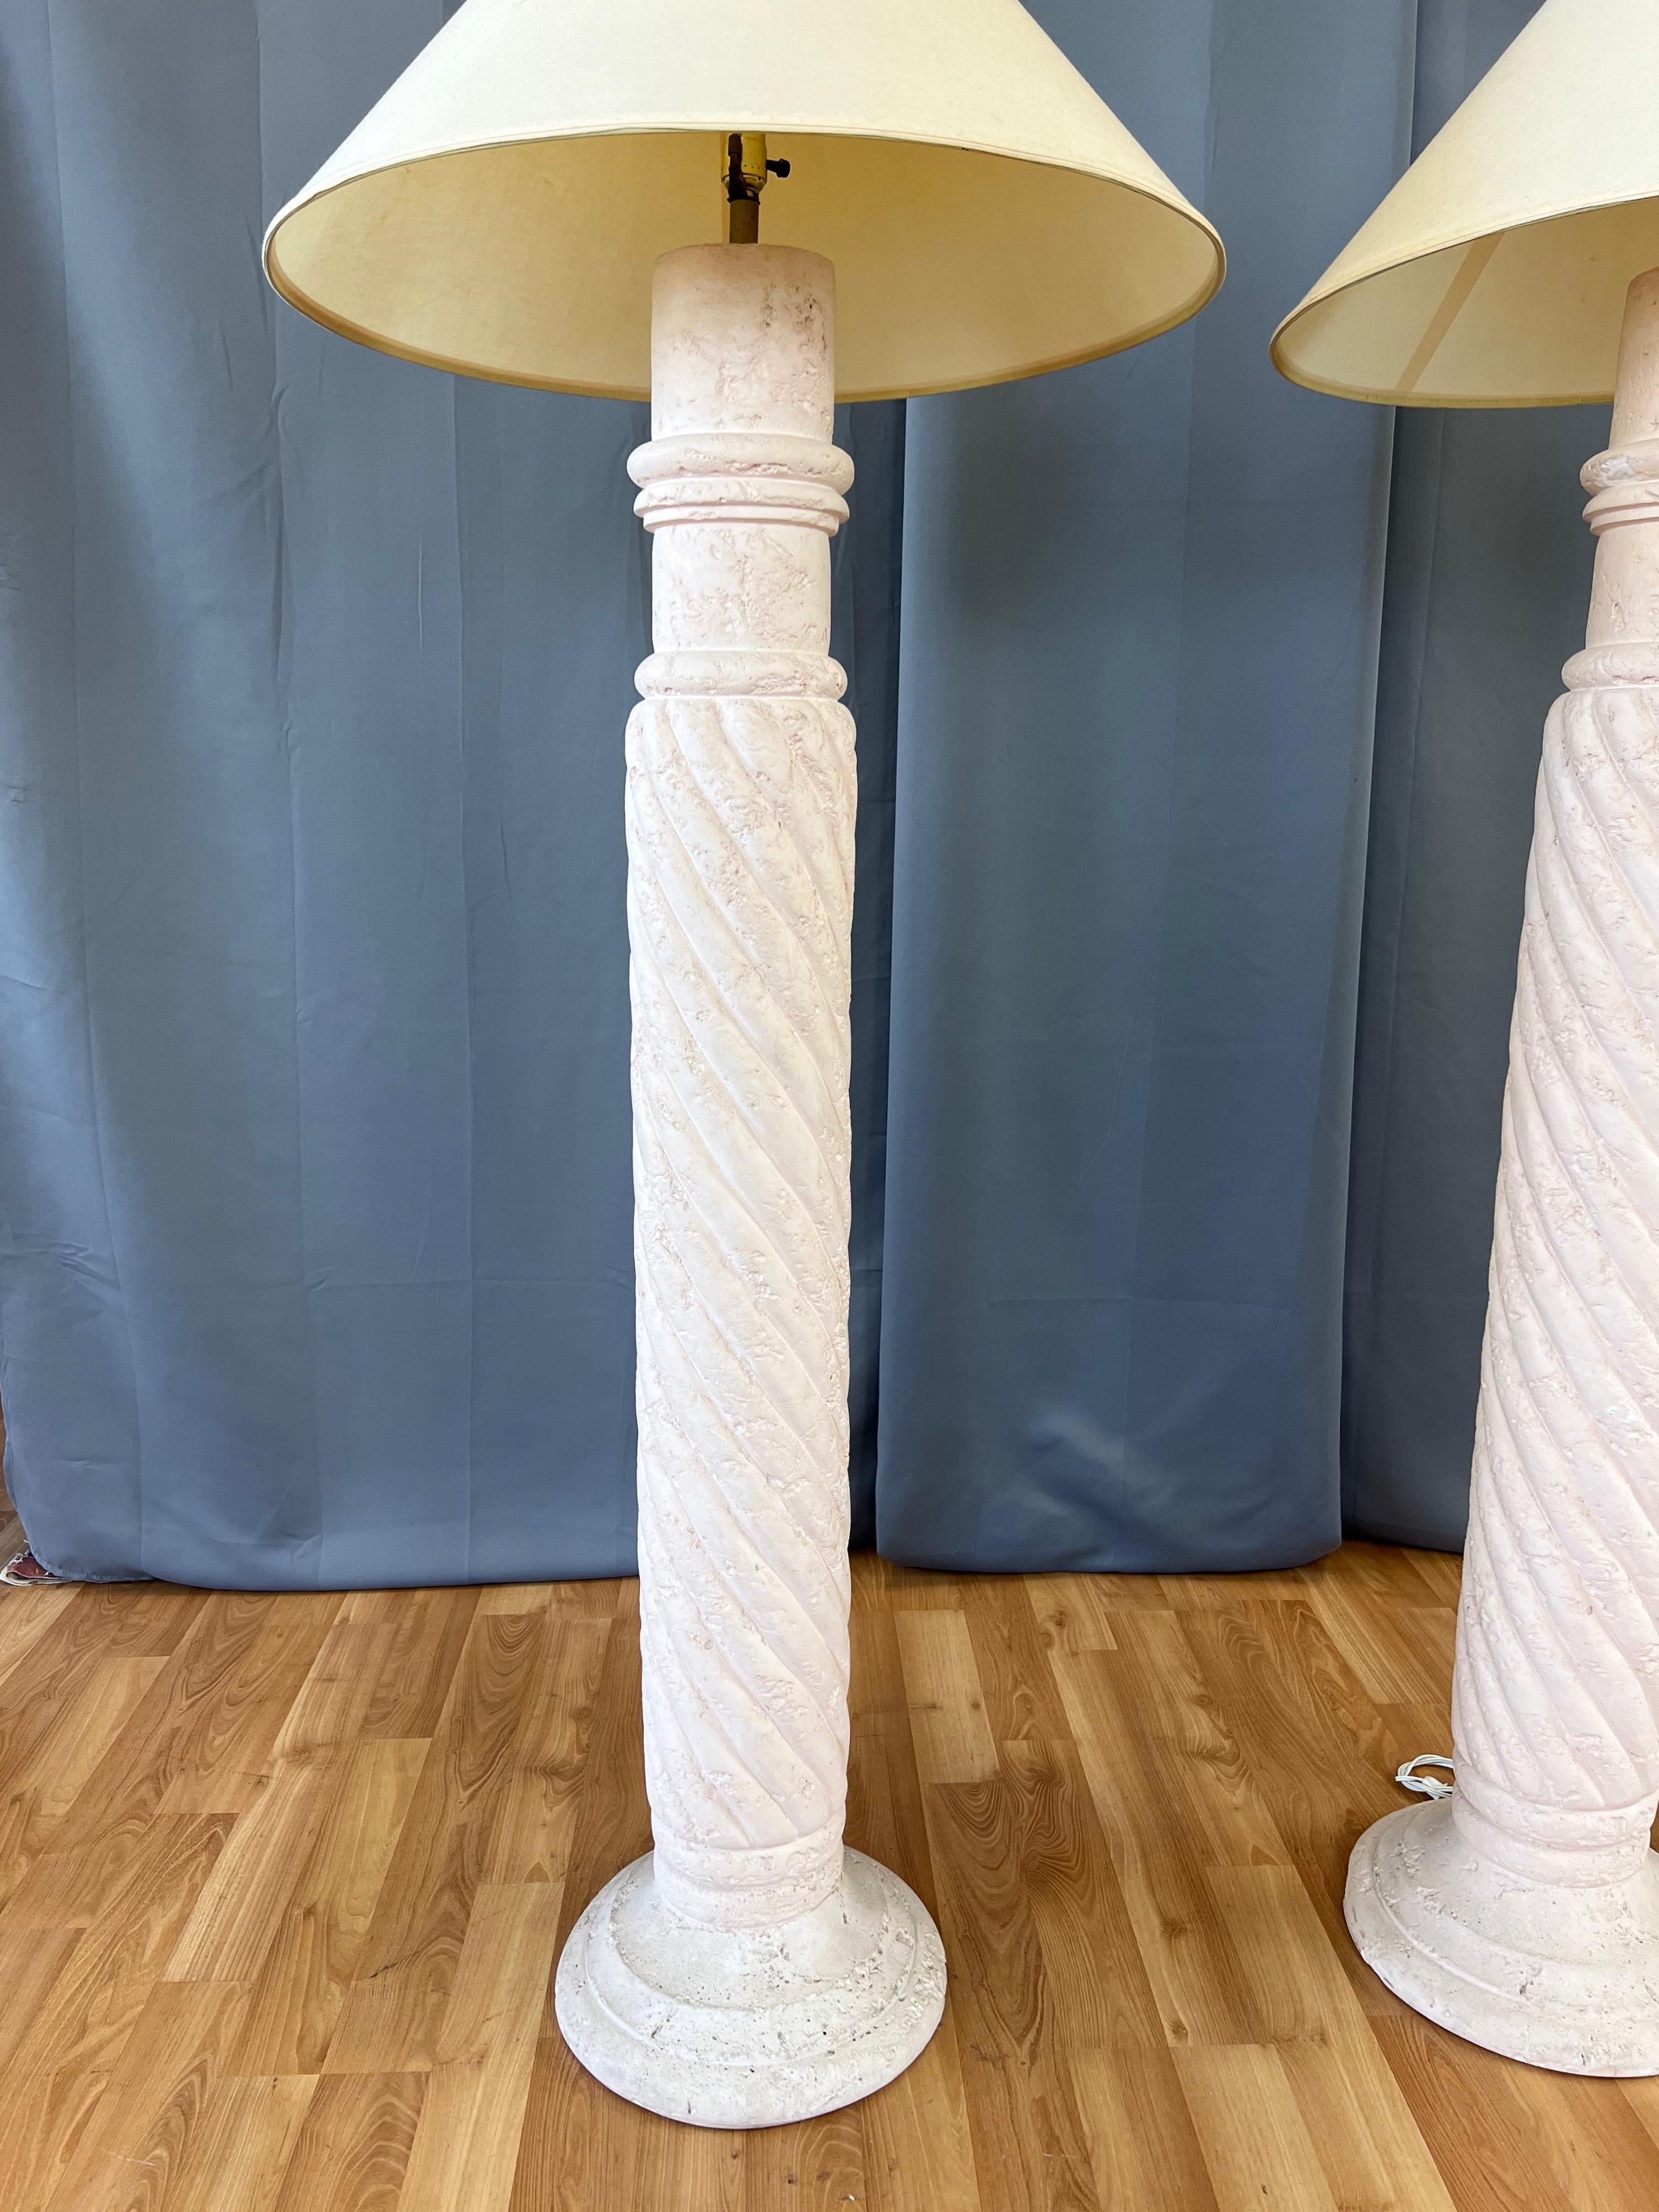 American Pair of Michael Taylor-Style Pale Pink Plaster Spiral Column Floor Lamps, 1980s For Sale